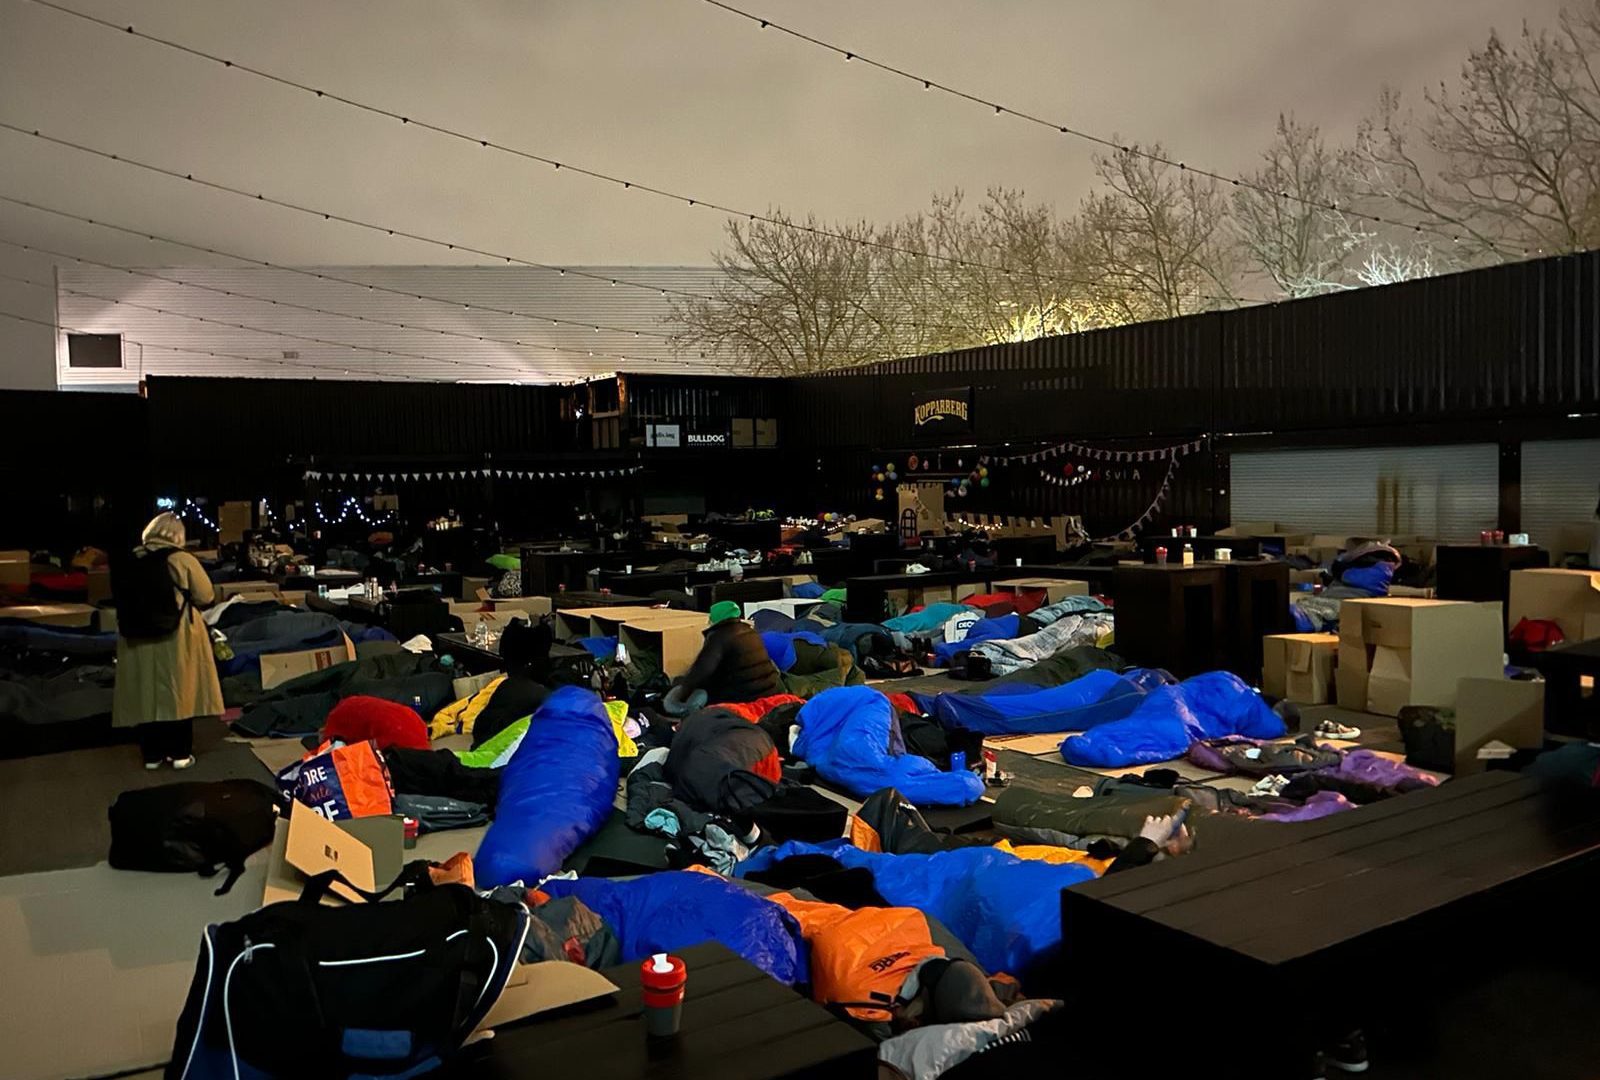 rovides further insight into the SleepOut experience and tells us why she'll be taking part again this evening..